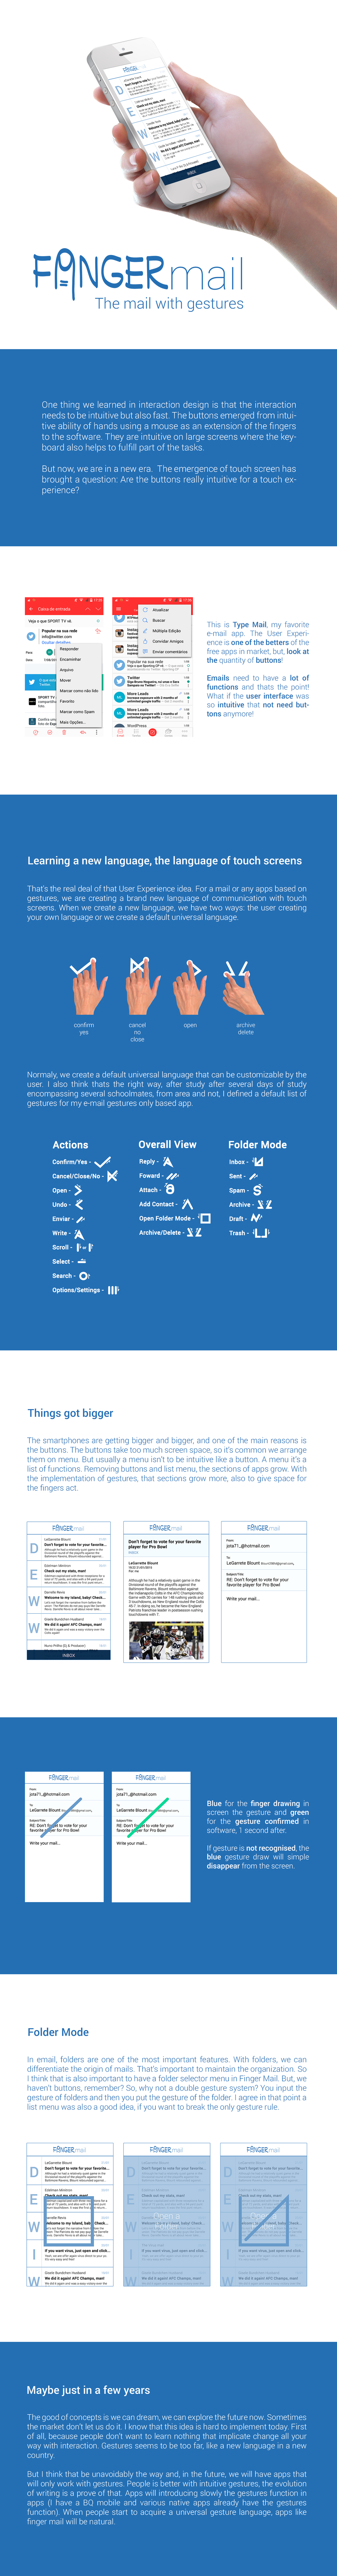 finger mail app ux user experience gestures gestures based gesture app gesture